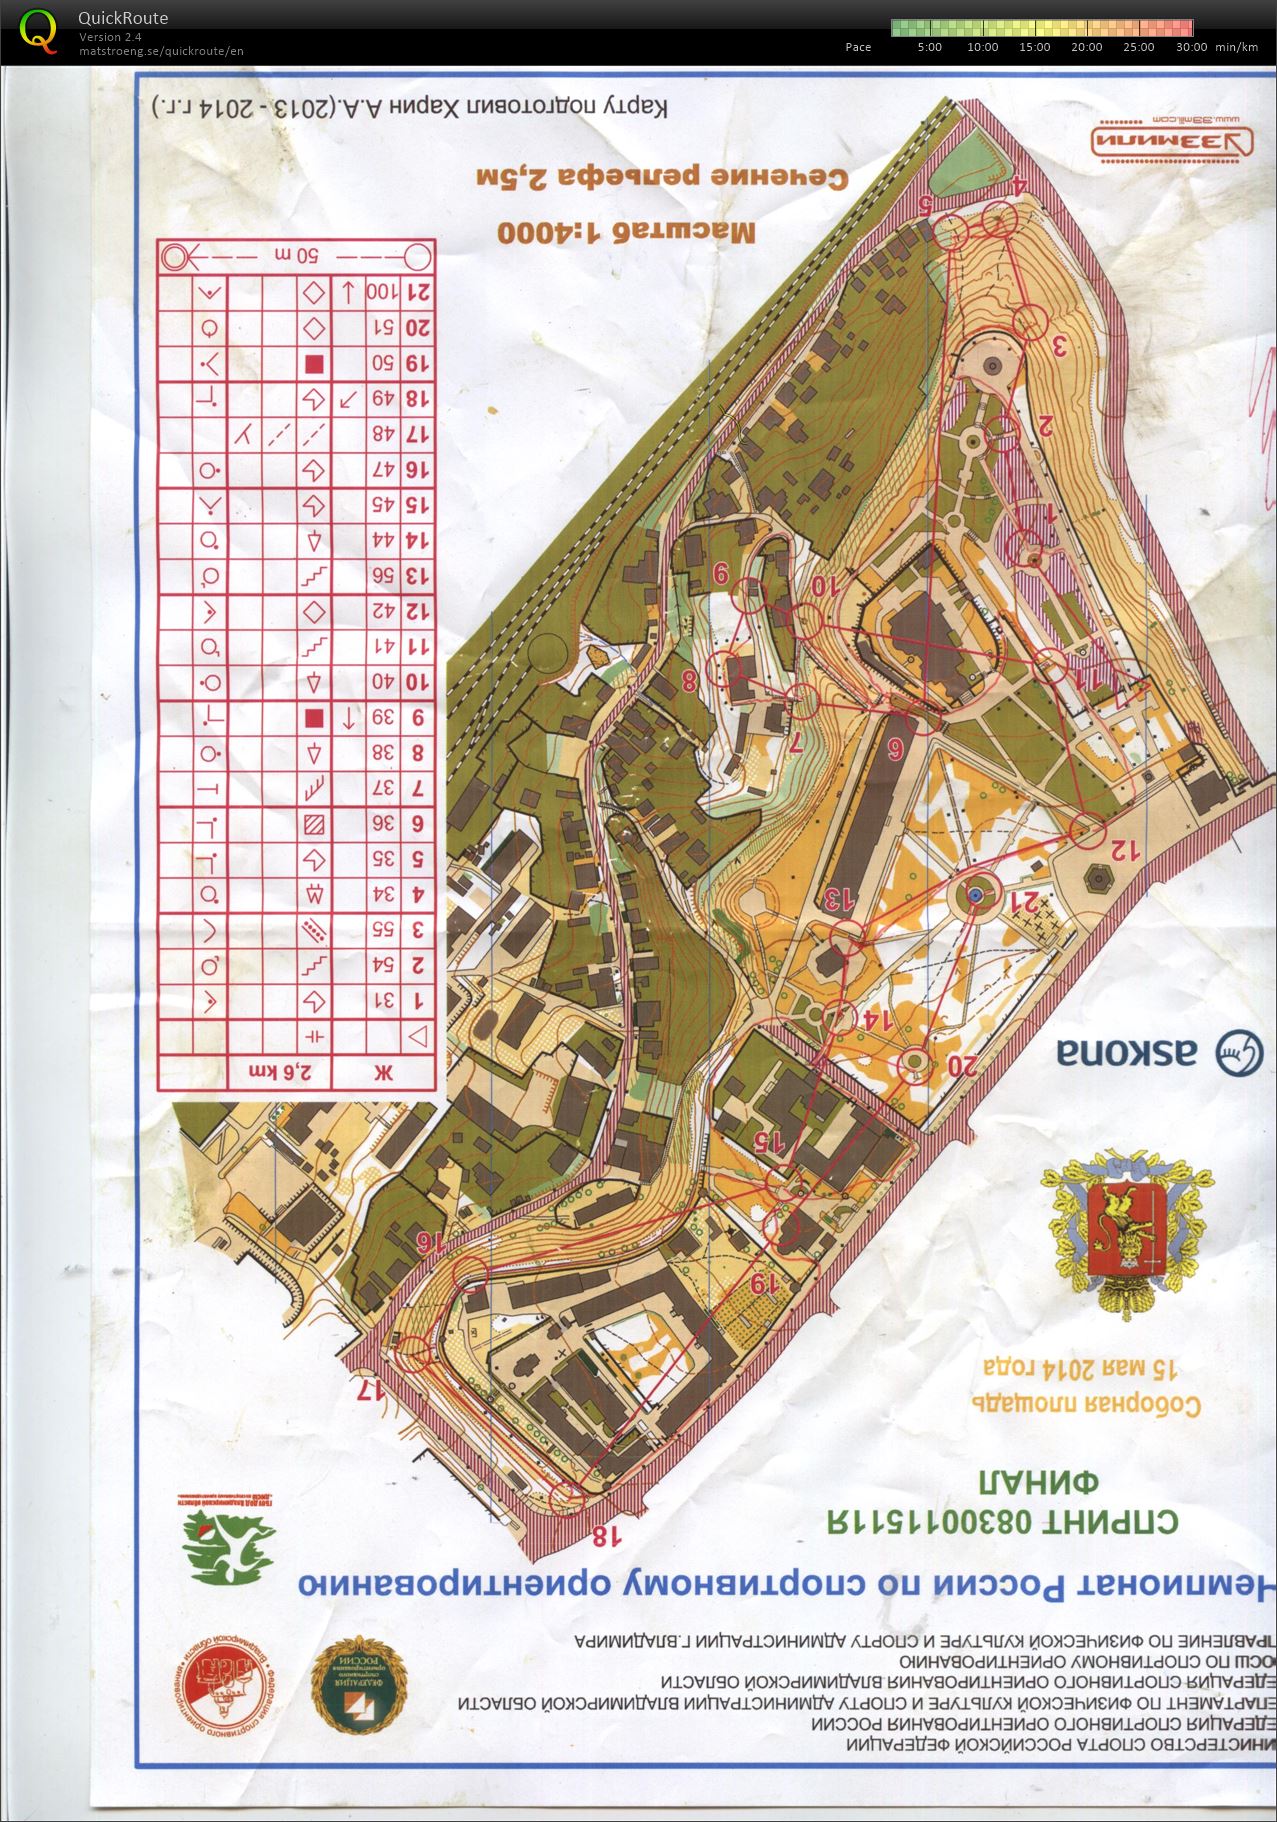 Map with track - Russian Championship, area - Vladimir, from orienteering map archive of Natalia Vinogradova